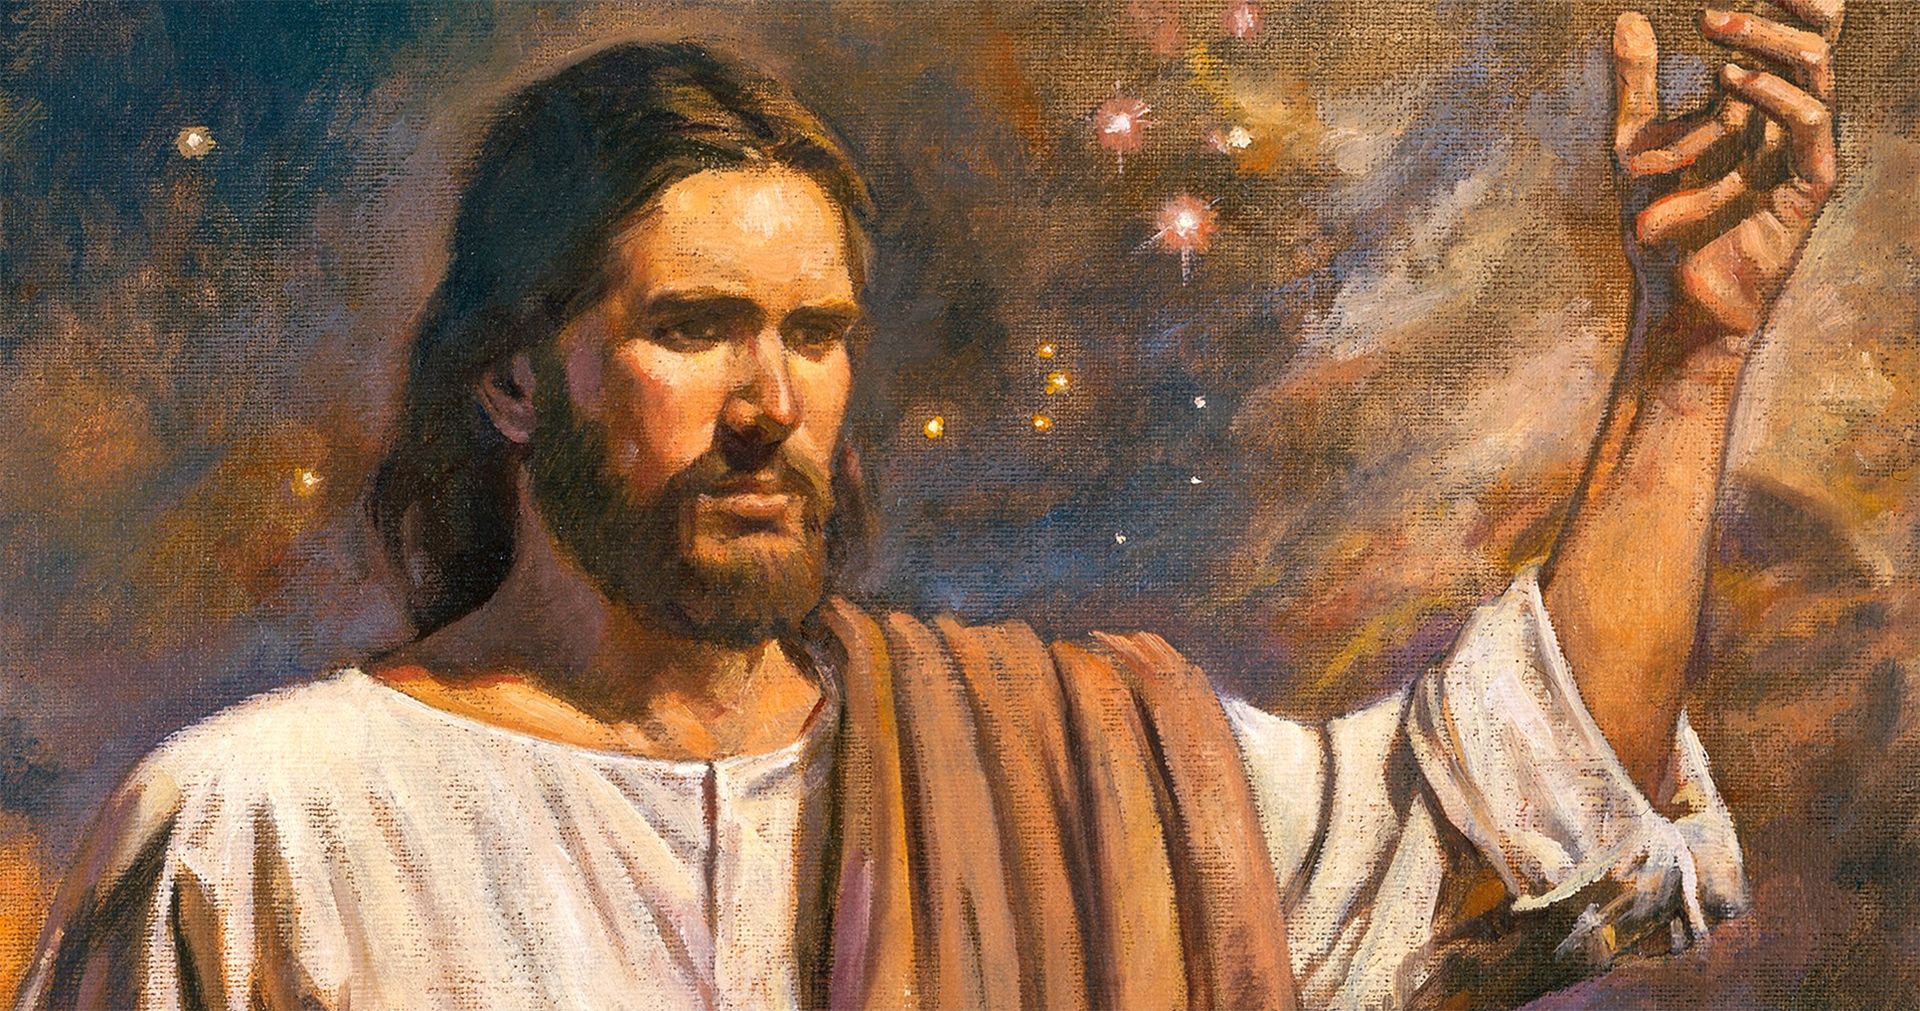 Painting of Jesus Christ with his arm raised, with clouds and stars in the background.